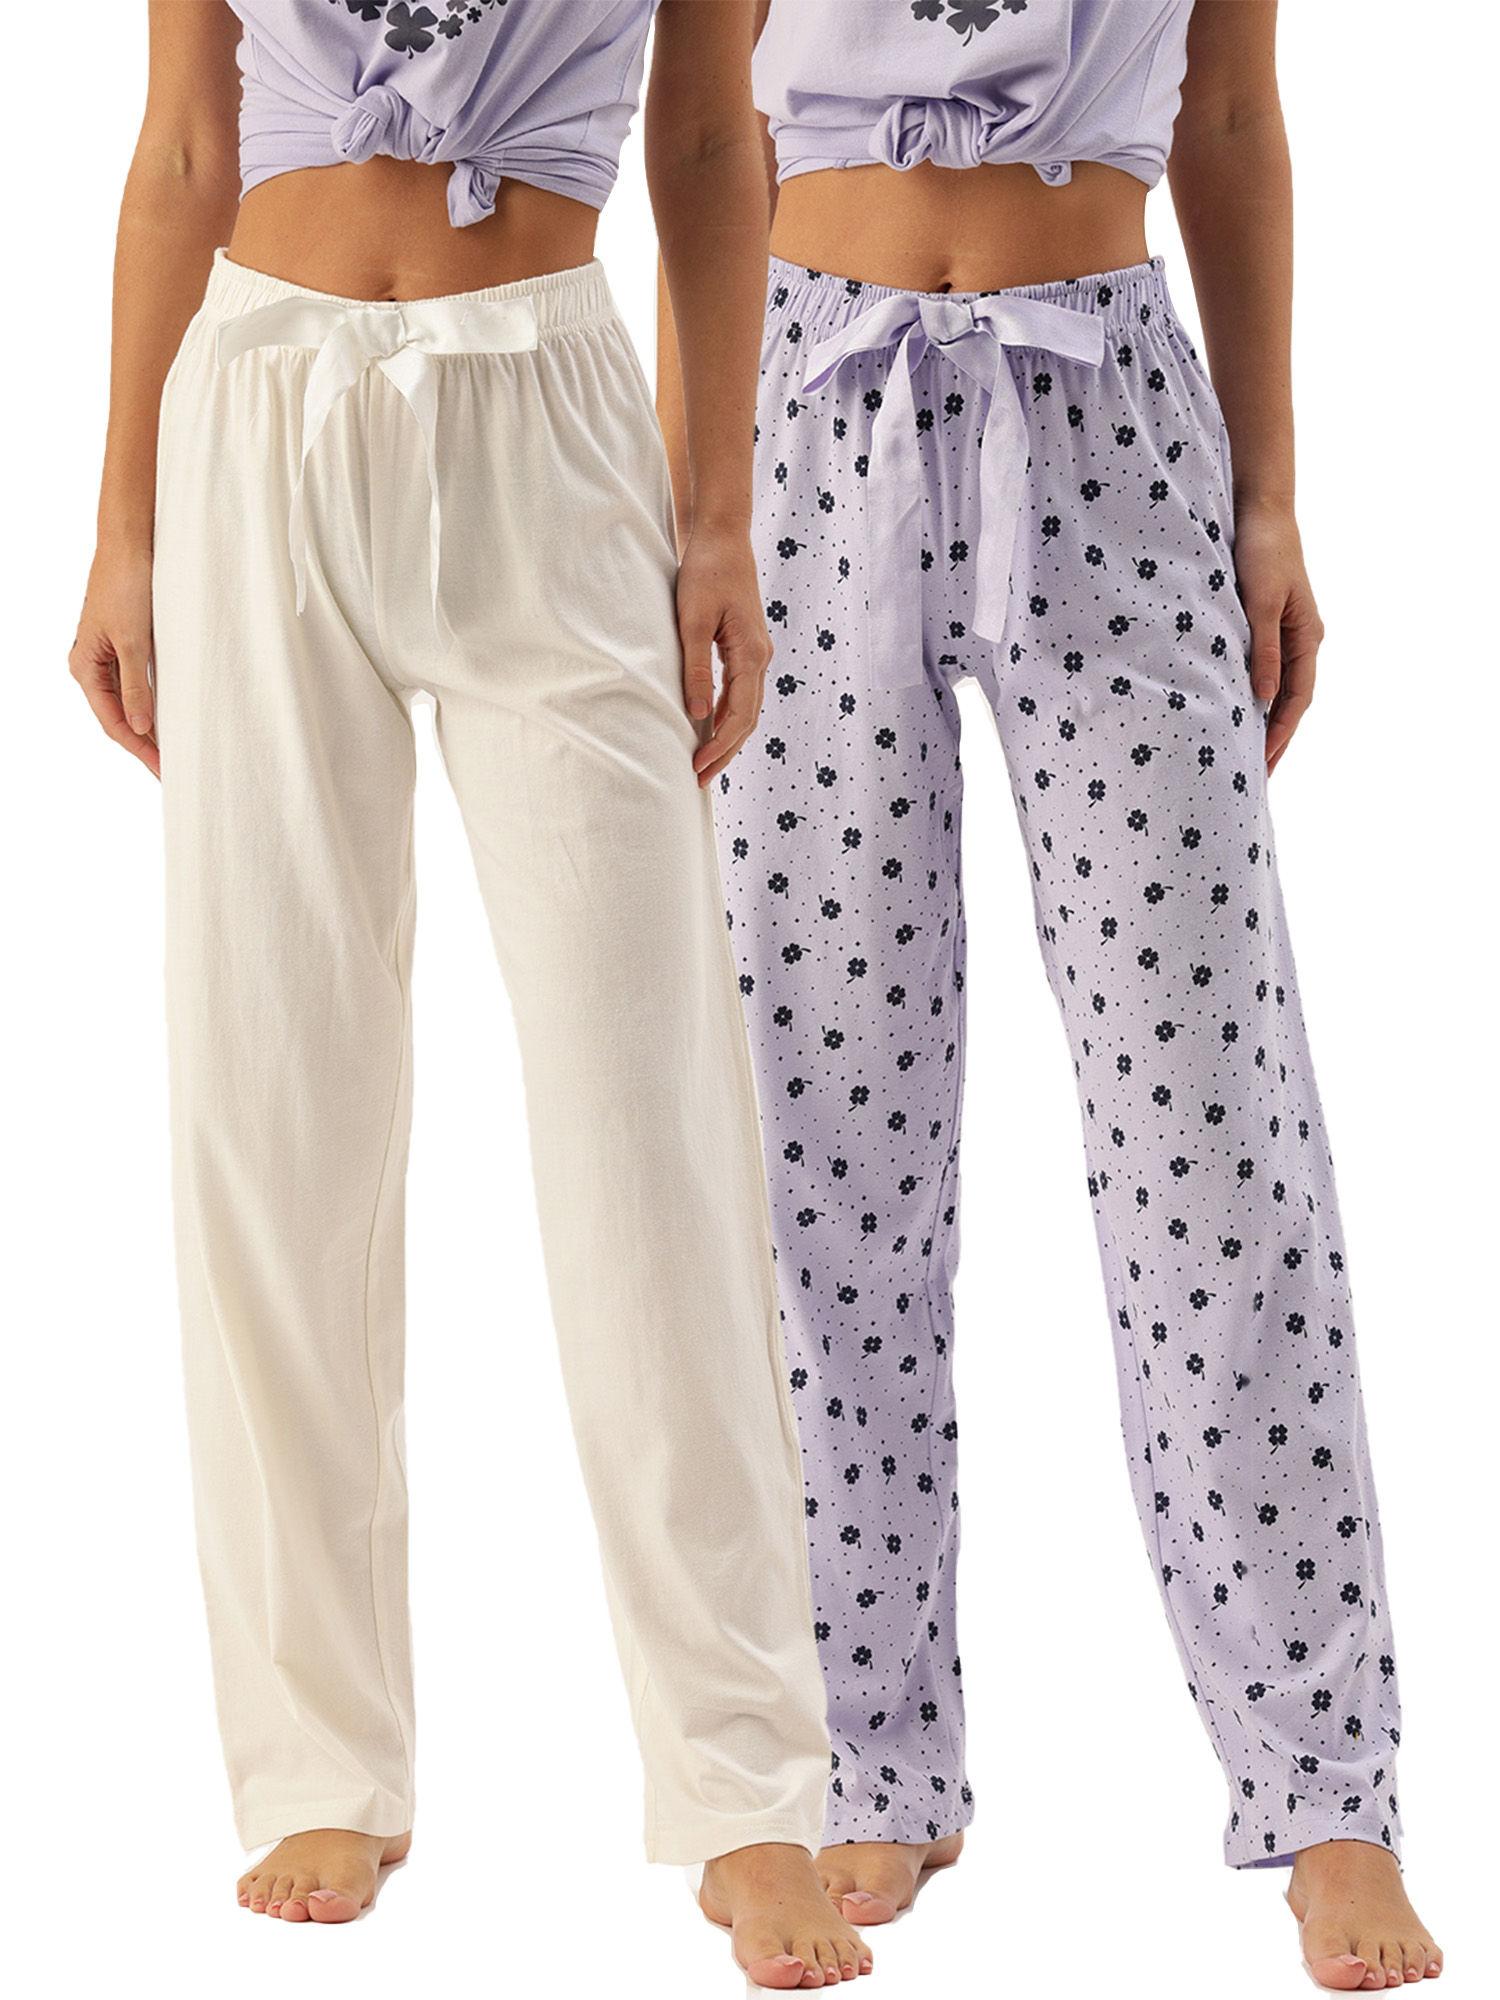 pack of 2 lounge pants - aop lavender + solid snow white